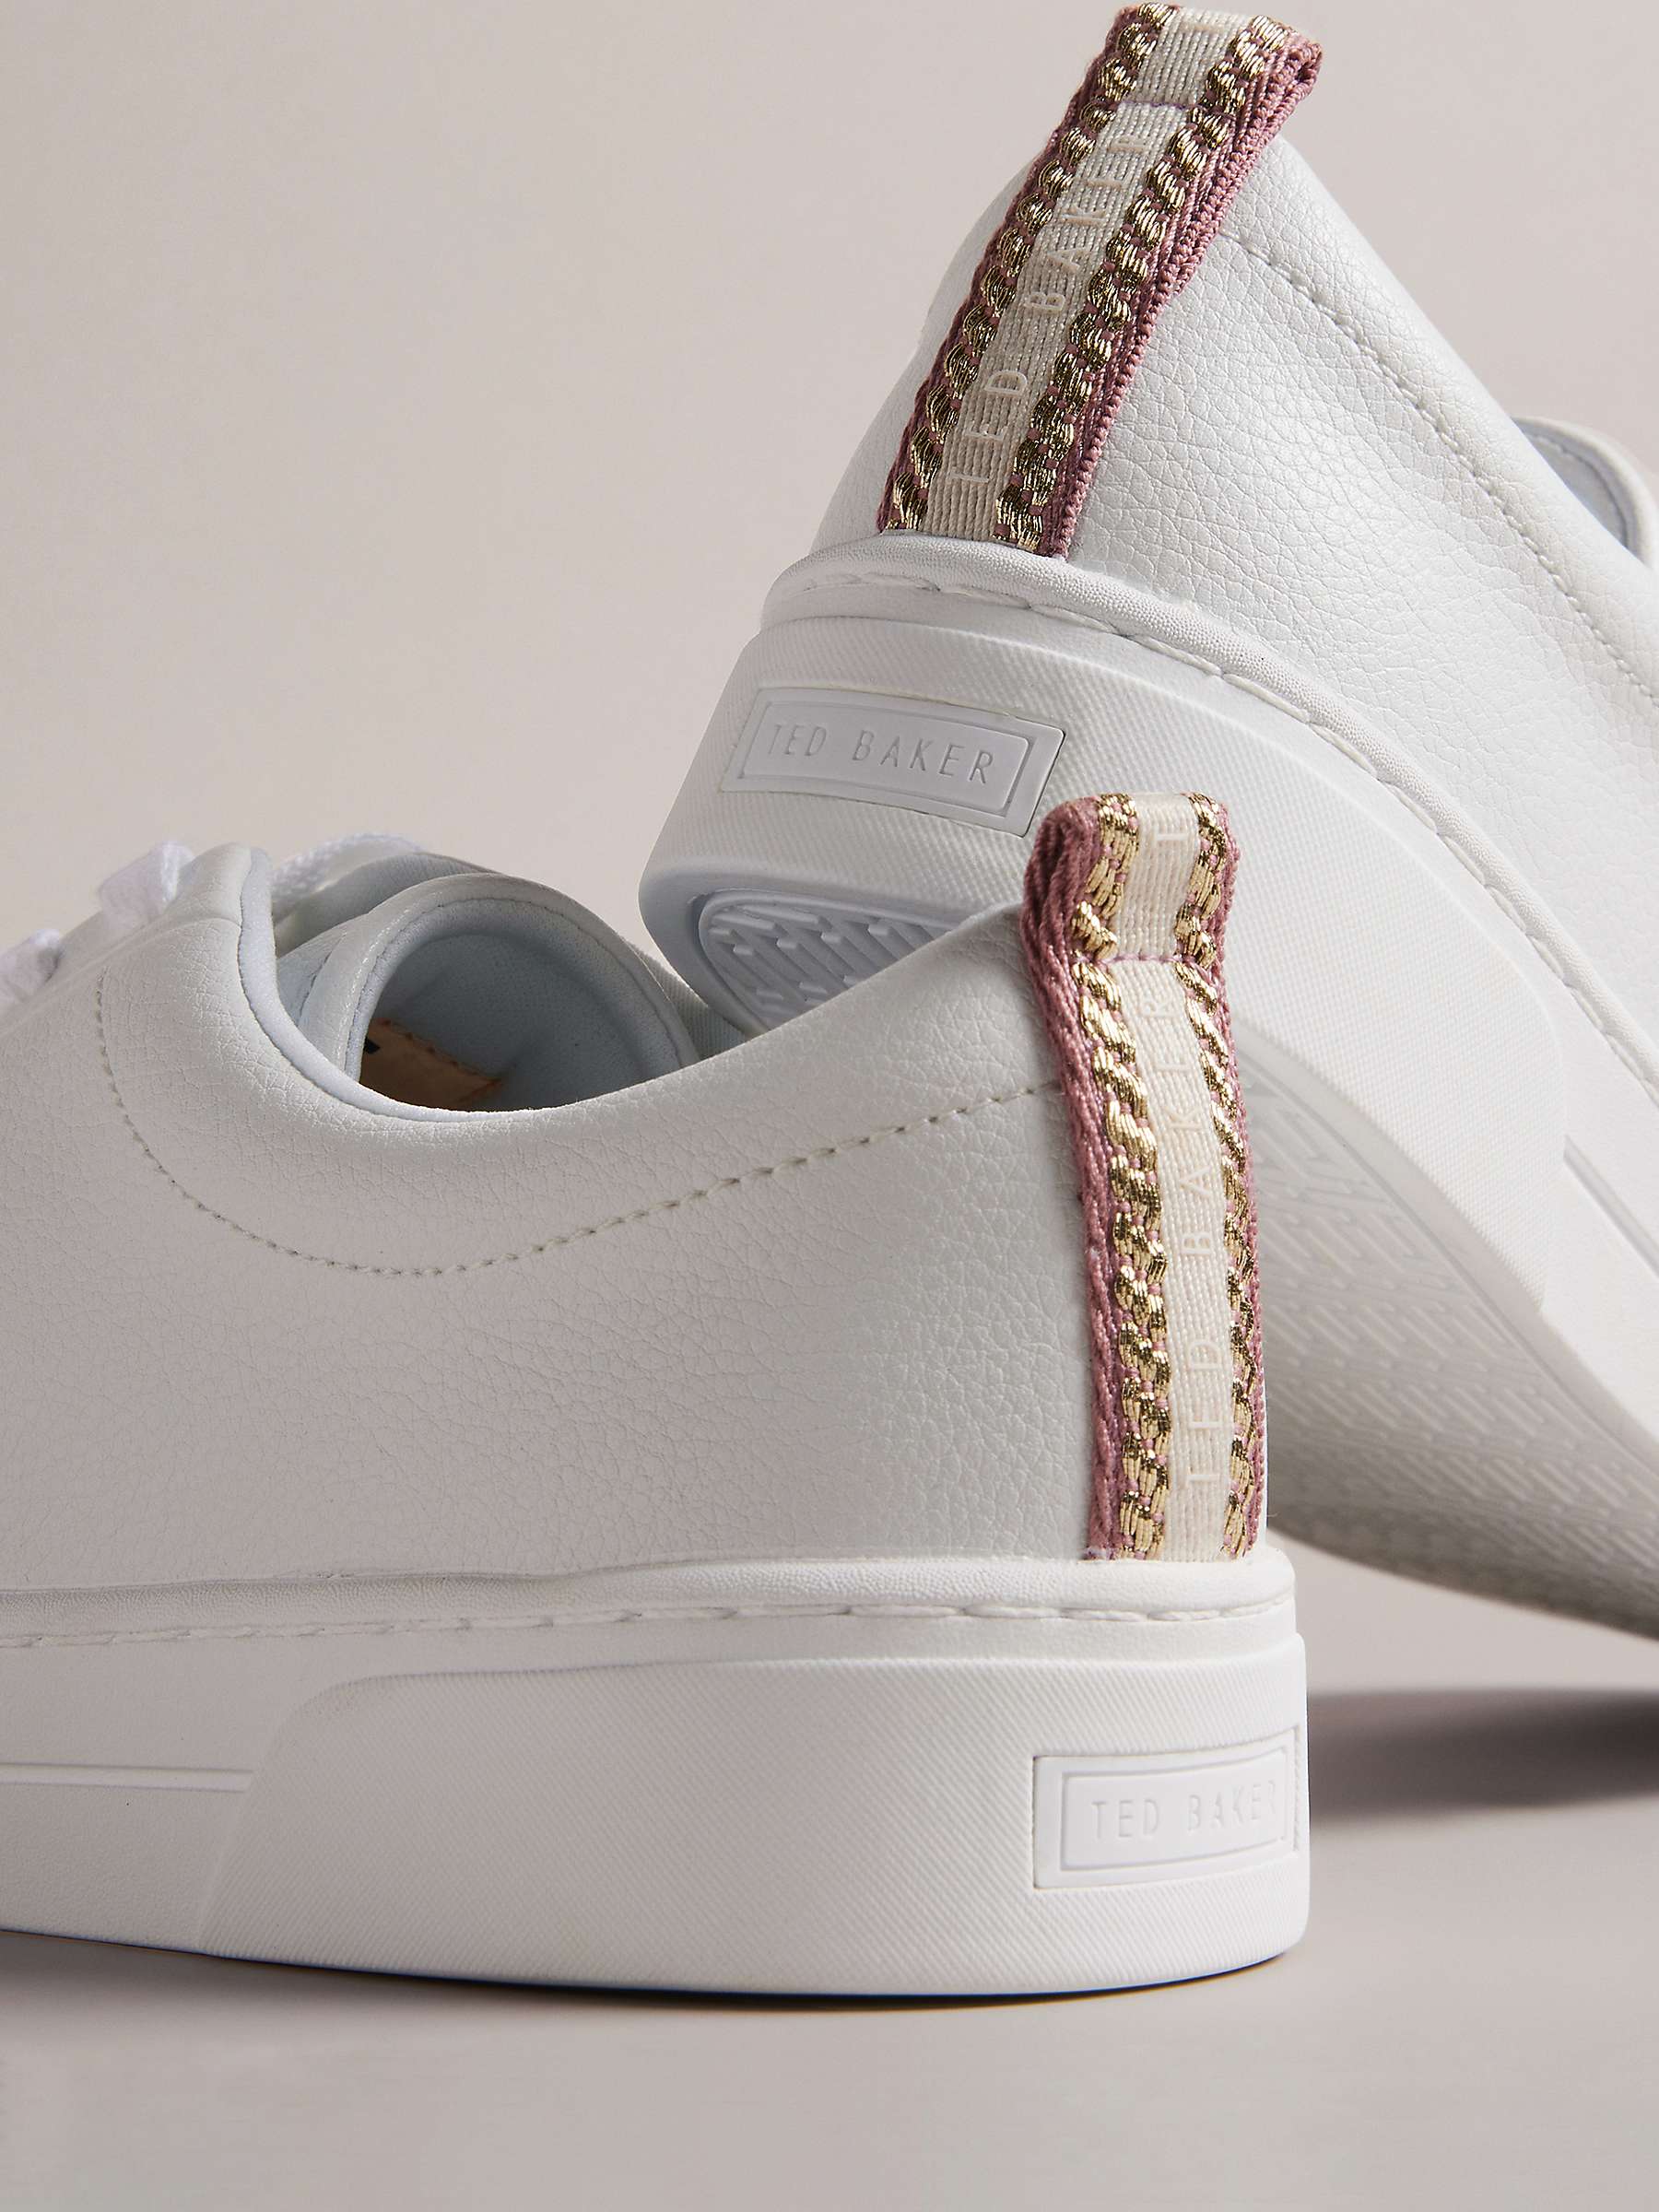 Buy Ted Baker Artioli Low Top Trainers, White Online at johnlewis.com